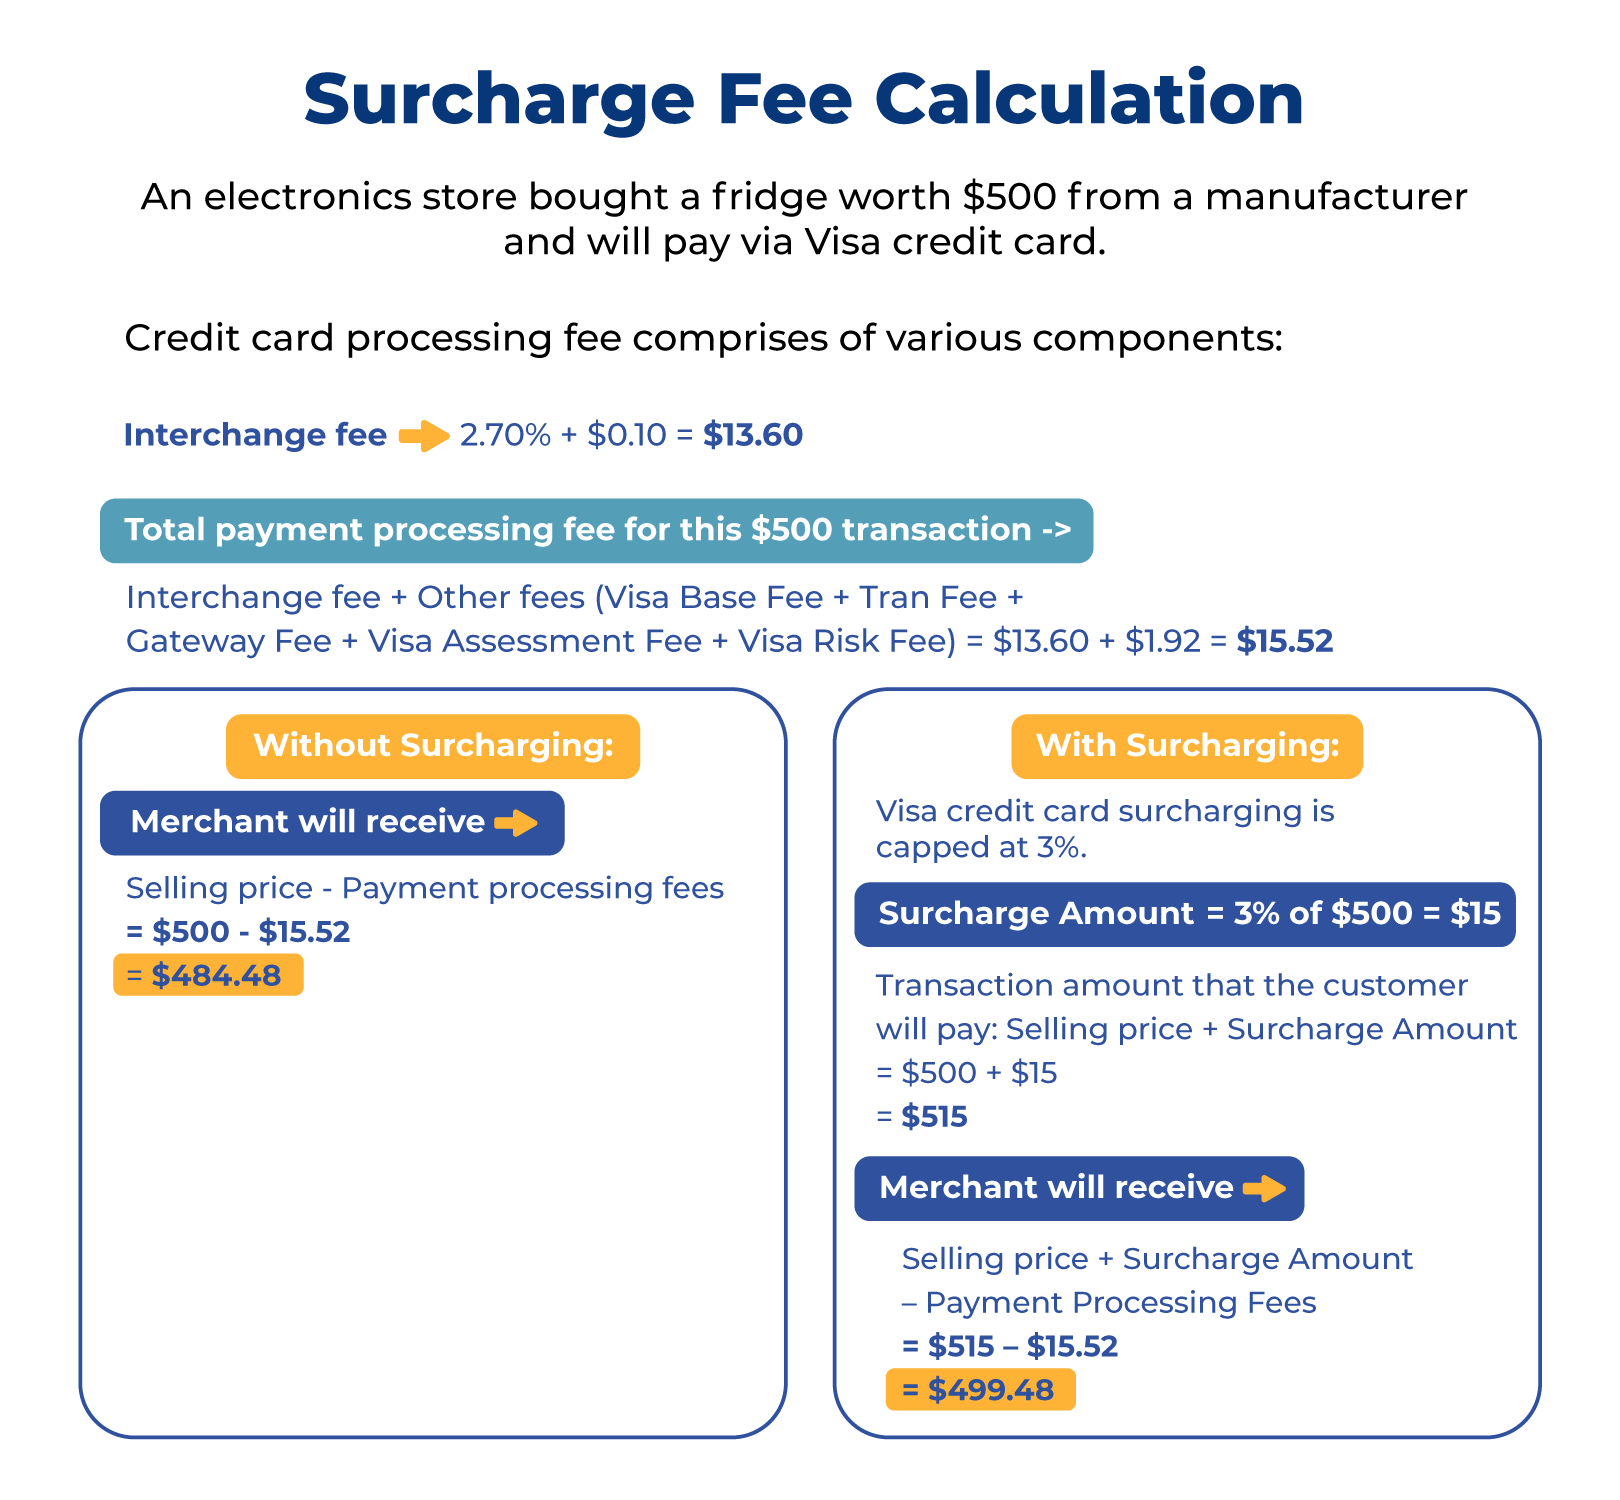 Surcharge Fee Calculation